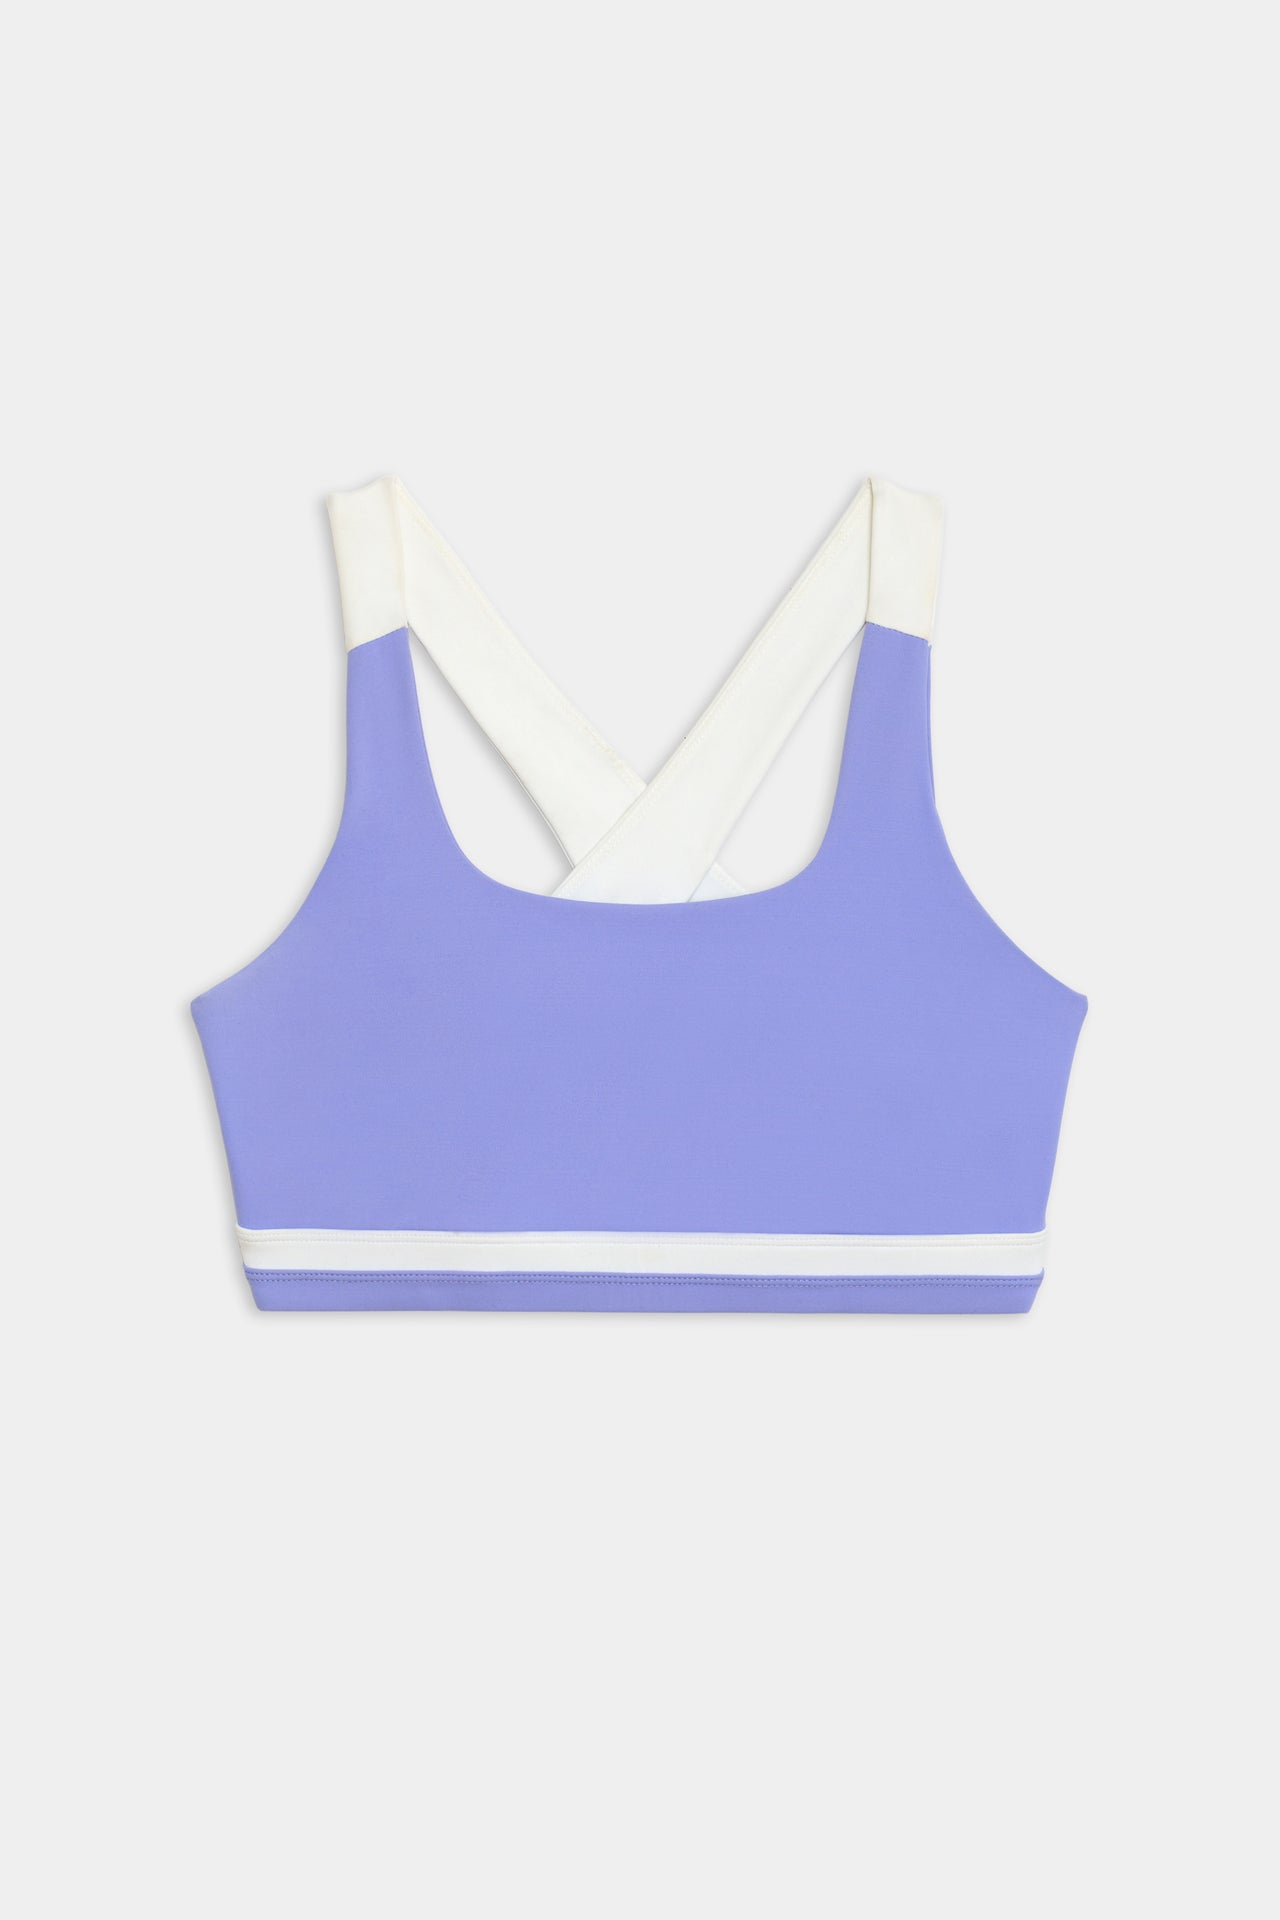 A Miles Rigor Bra in Purple Haze/White with white stripes and enhanced support by SPLITS59.